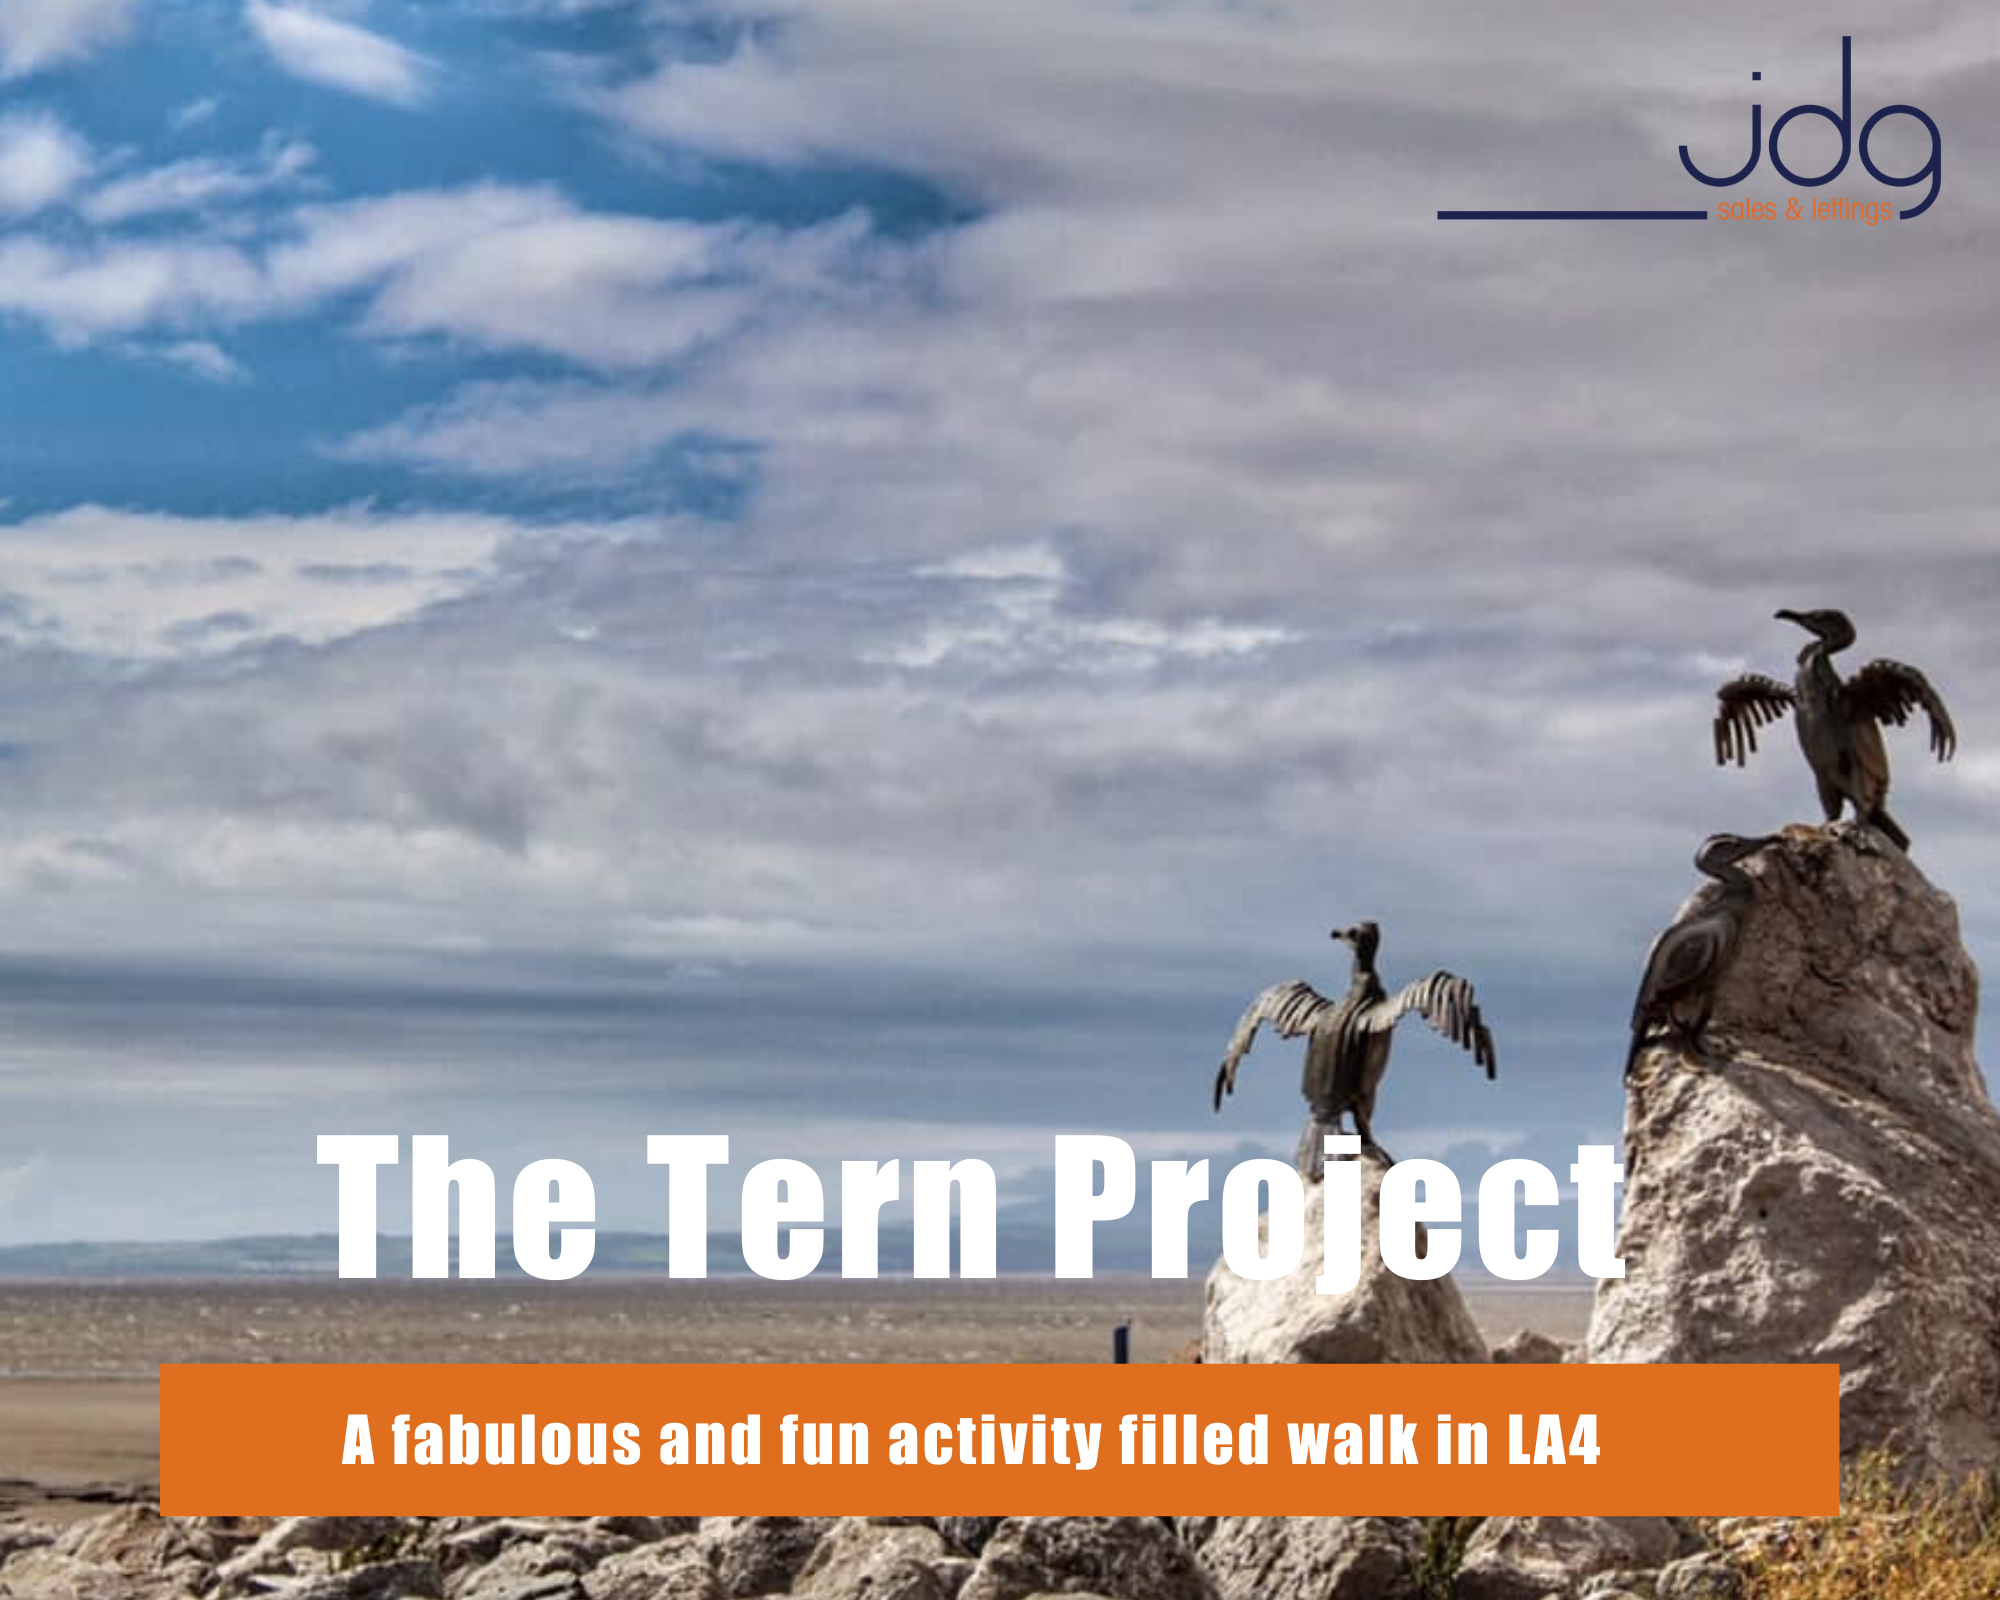 Have you heard about the Tern Project - an activity walk in Morecambe?